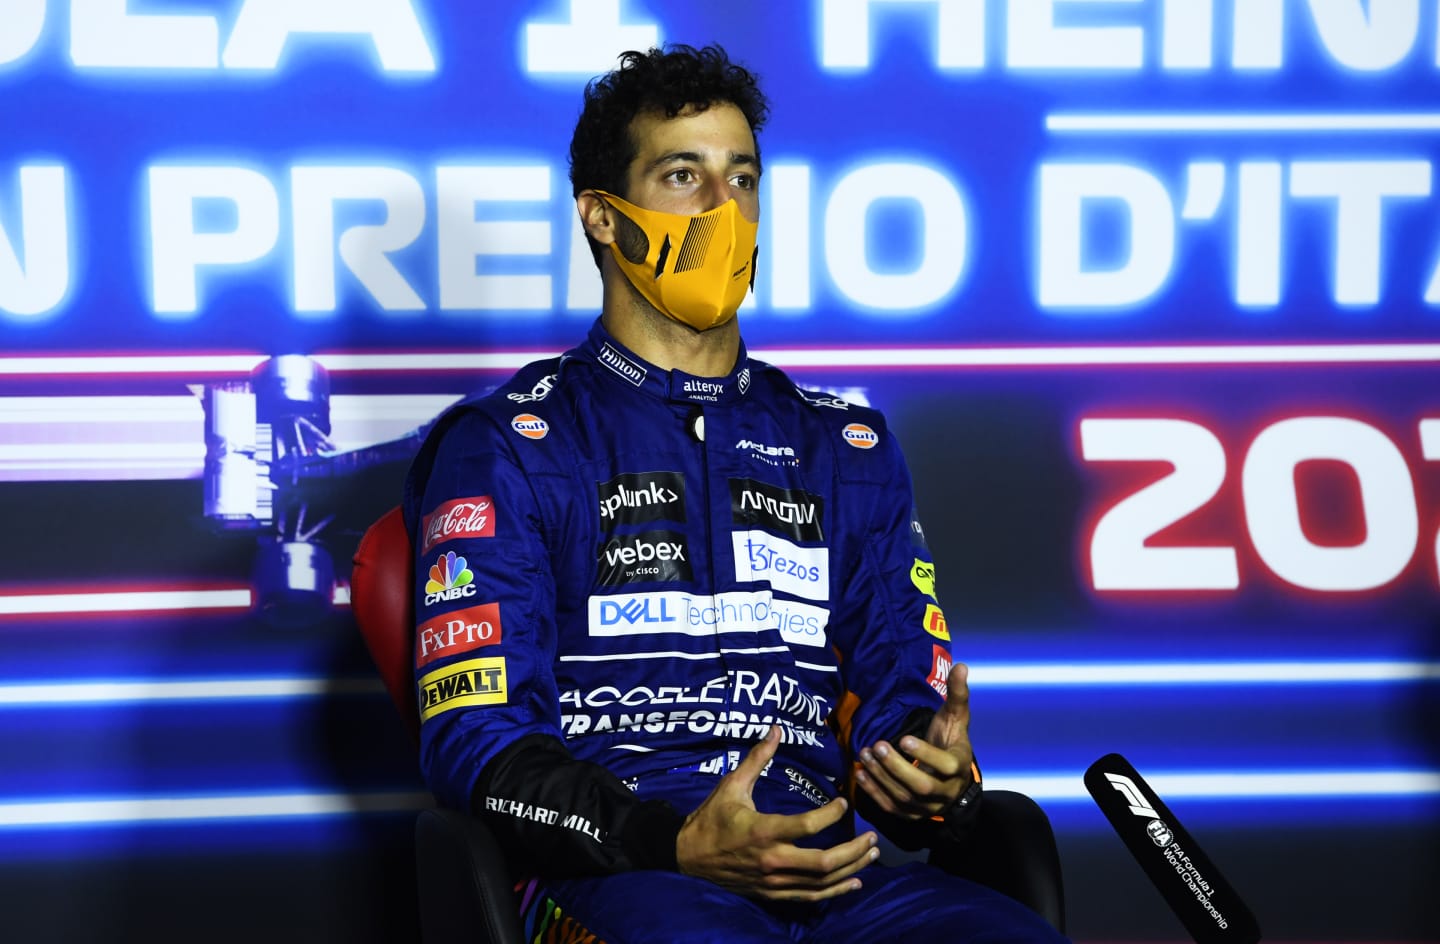 MONZA, ITALY - SEPTEMBER 12: Race winner Daniel Ricciardo of Australia and McLaren F1 talks in the press conference after the F1 Grand Prix of Italy at Autodromo di Monza on September 12, 2021 in Monza, Italy. (Photo by Rudy Carezzevoli/Getty Images)